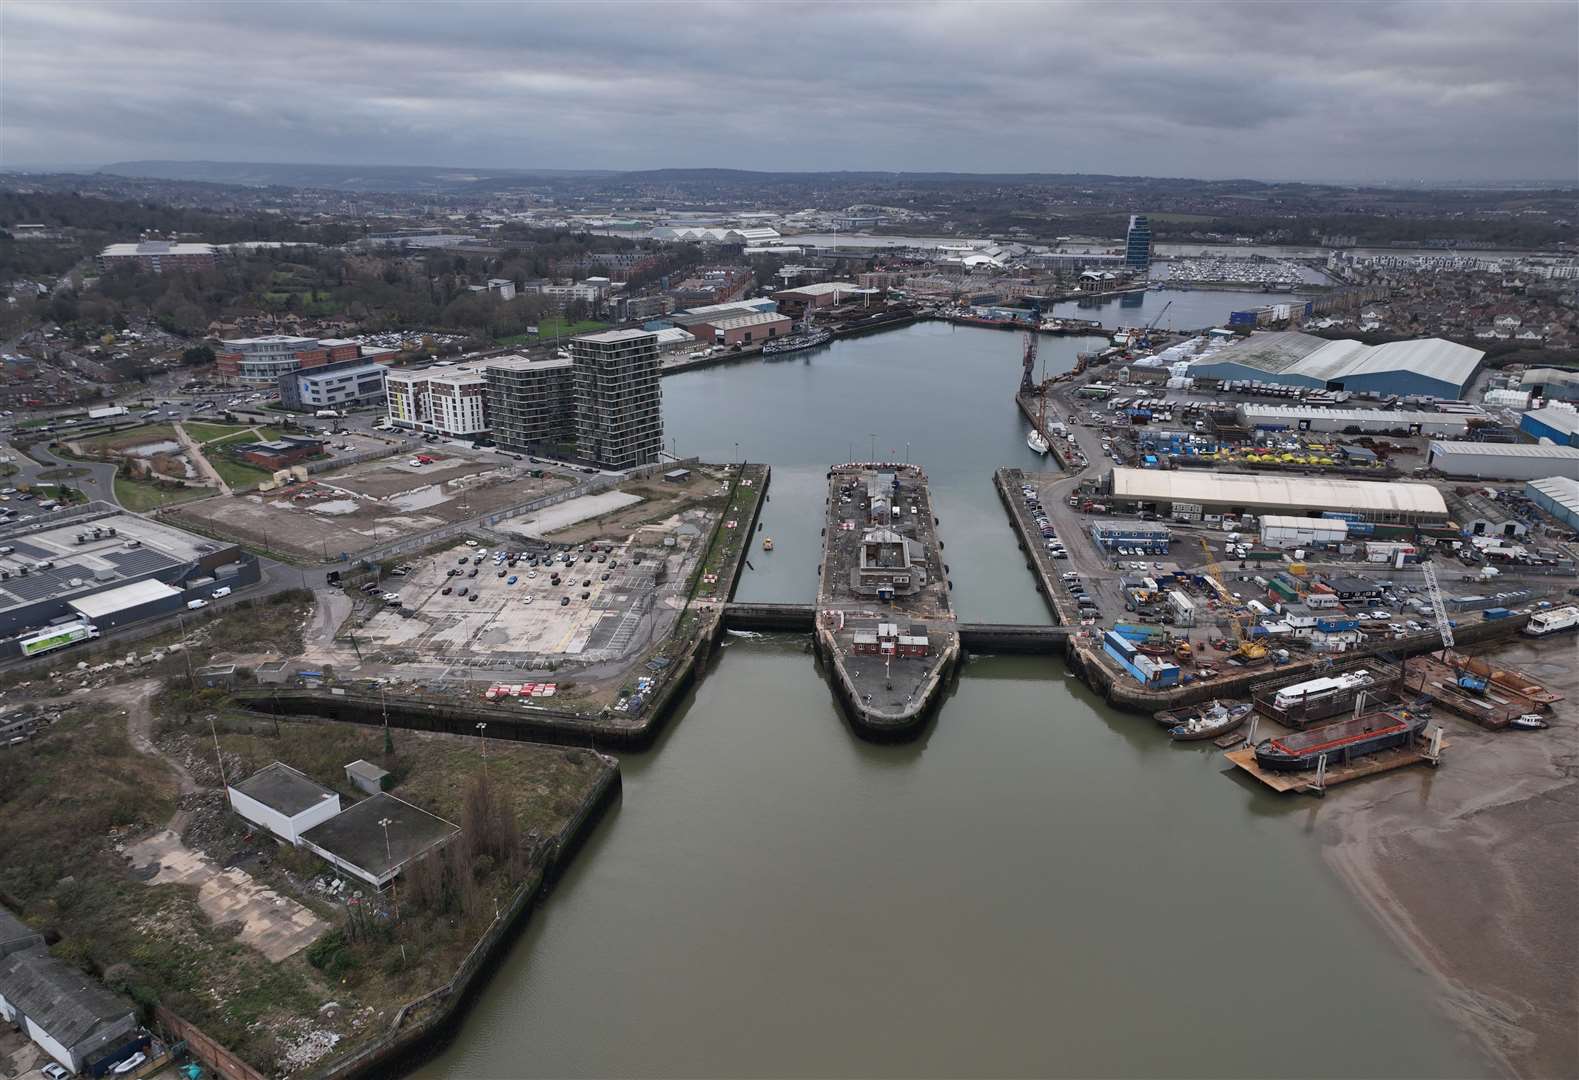 Chatham Docks are subject to plans for redevelopment by Peel L&P. Picture: Phil Drew